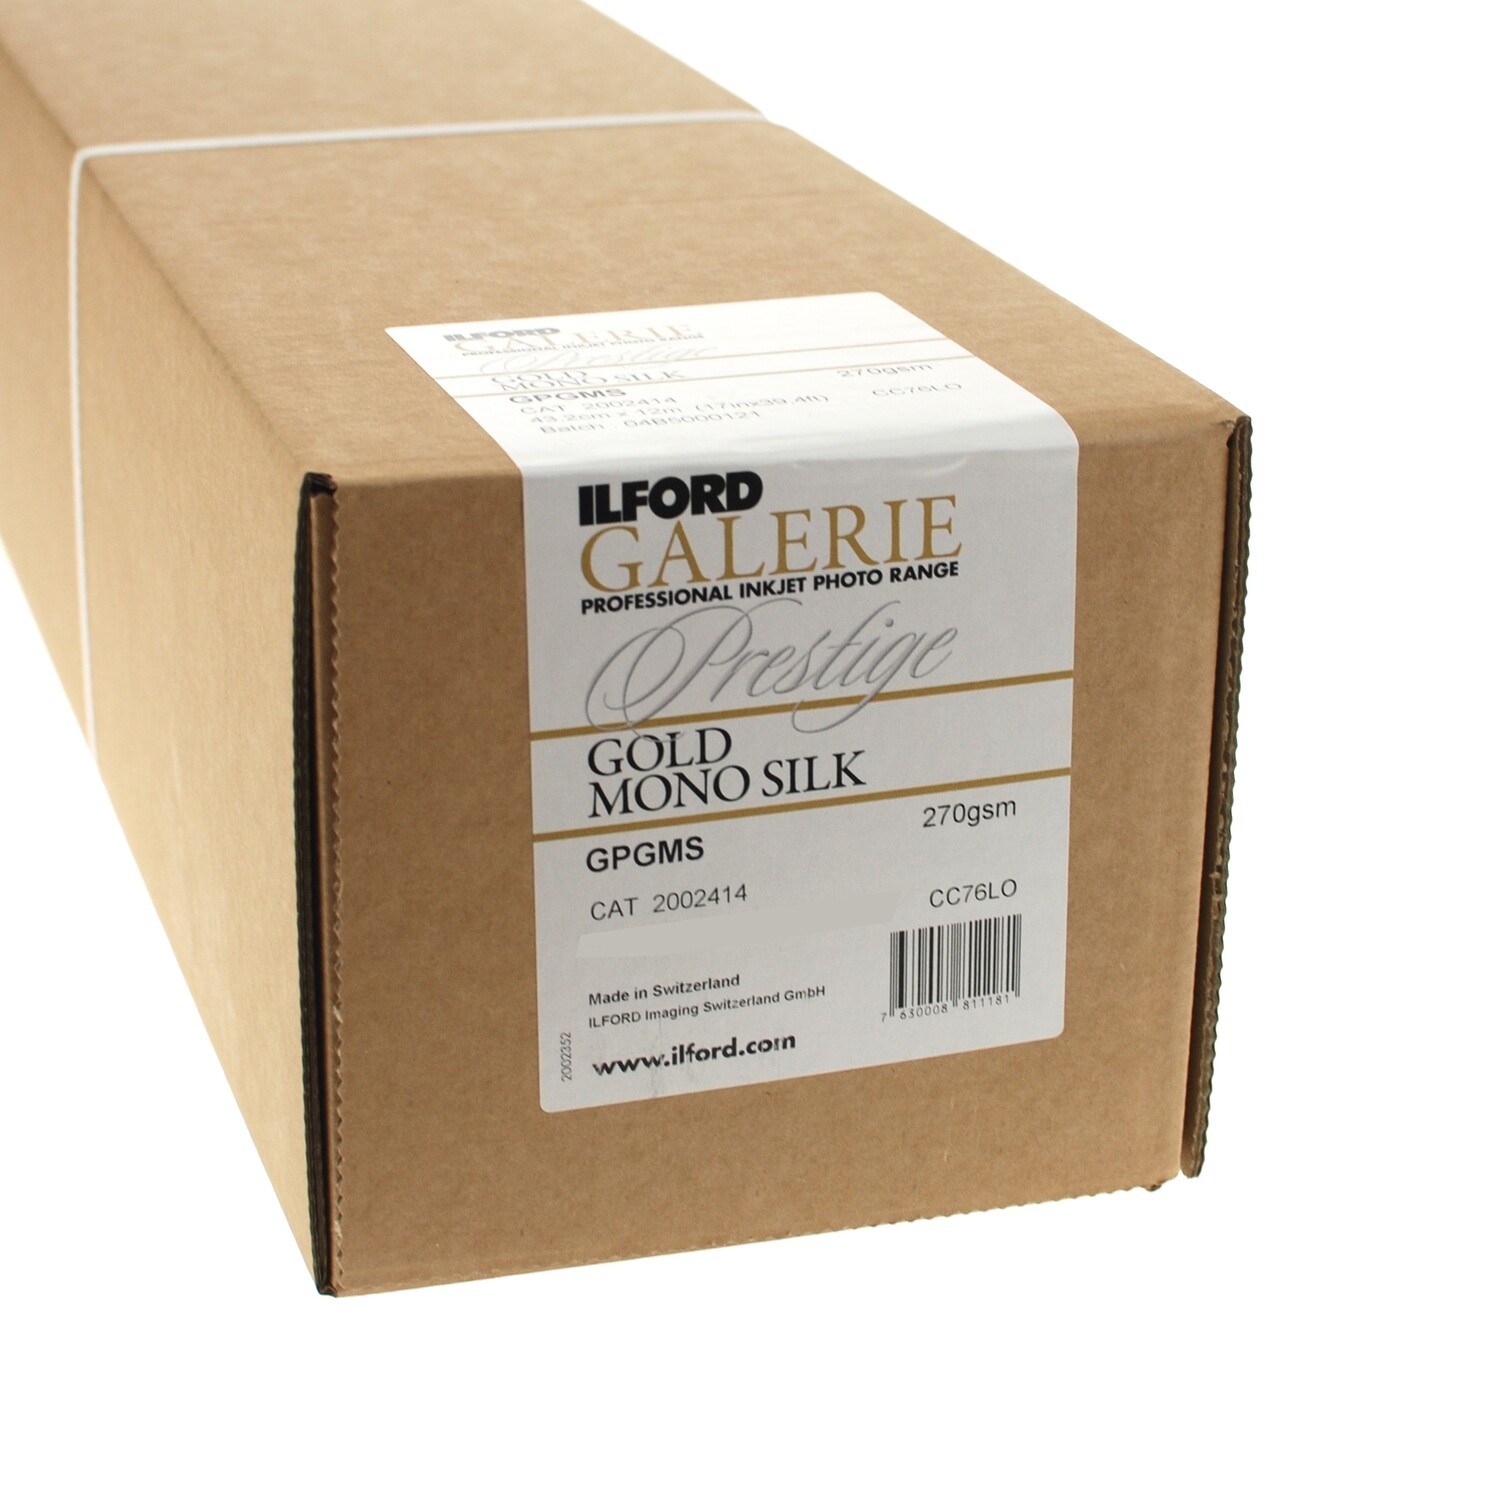 ILFORD GALERIE GOLD MONO SILK (270g) Rolle - Rolle 61x1520 CM (24Inchx50ft)